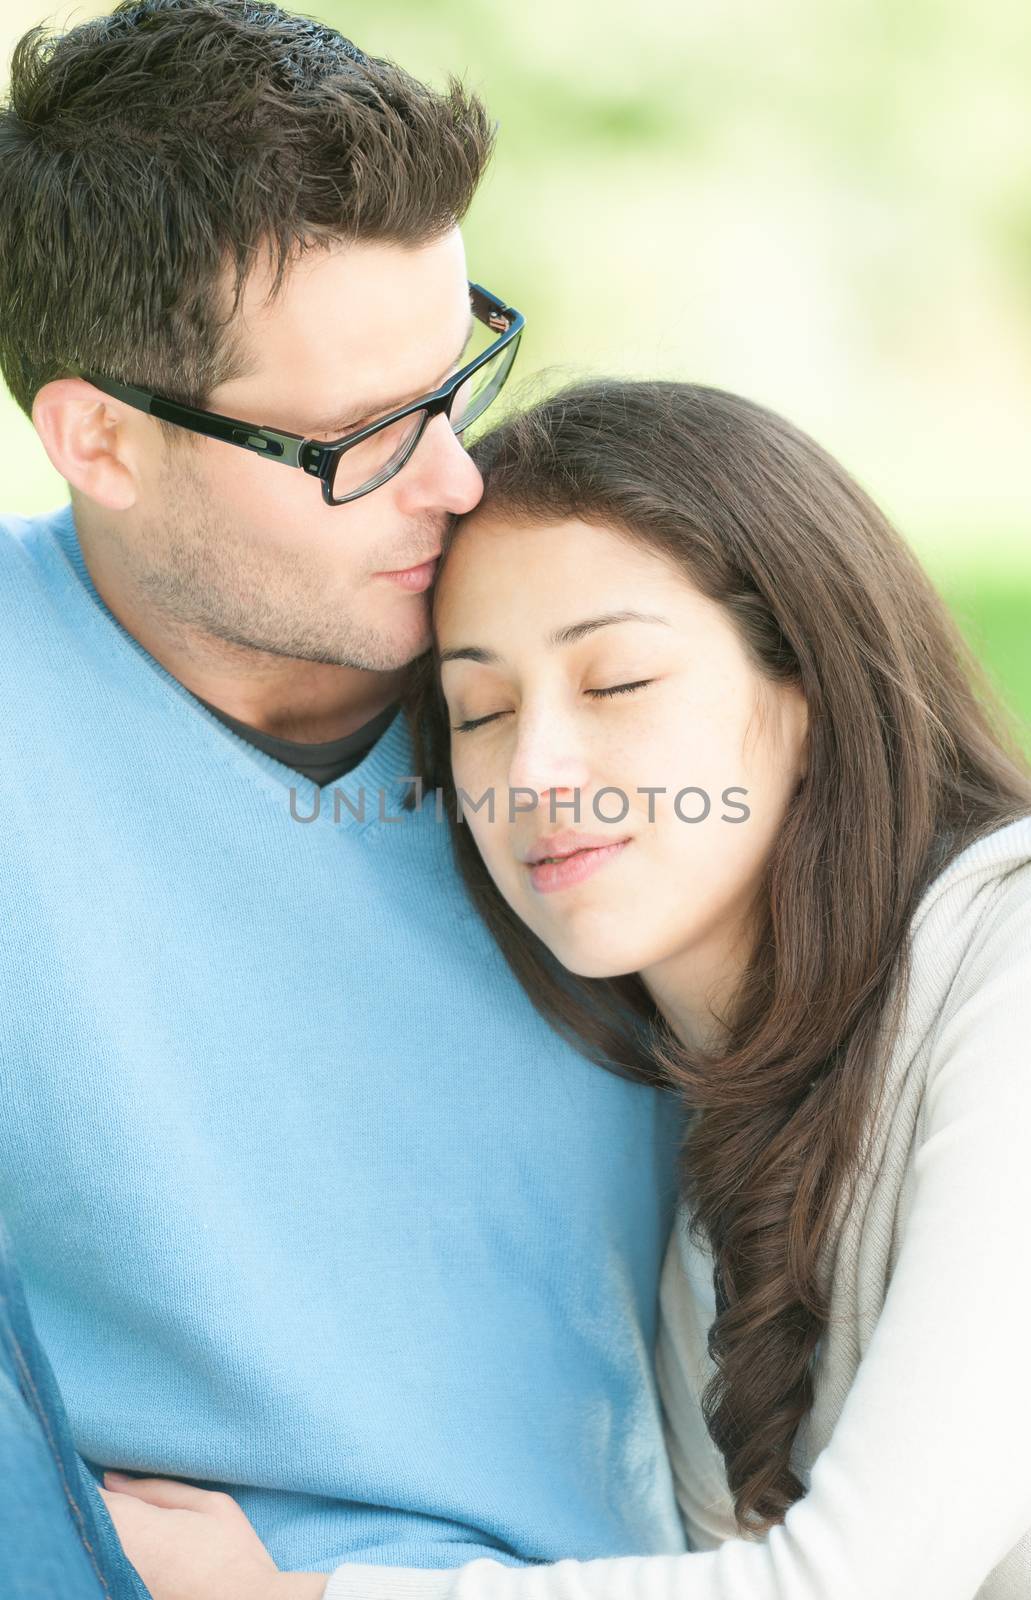 Portrait of young sweet couple spending time outdoor together. Woman leaning on man's shoulder with her eyes closed. Quiet and peaceful atmosphere. Romantic relationships. Family and love.